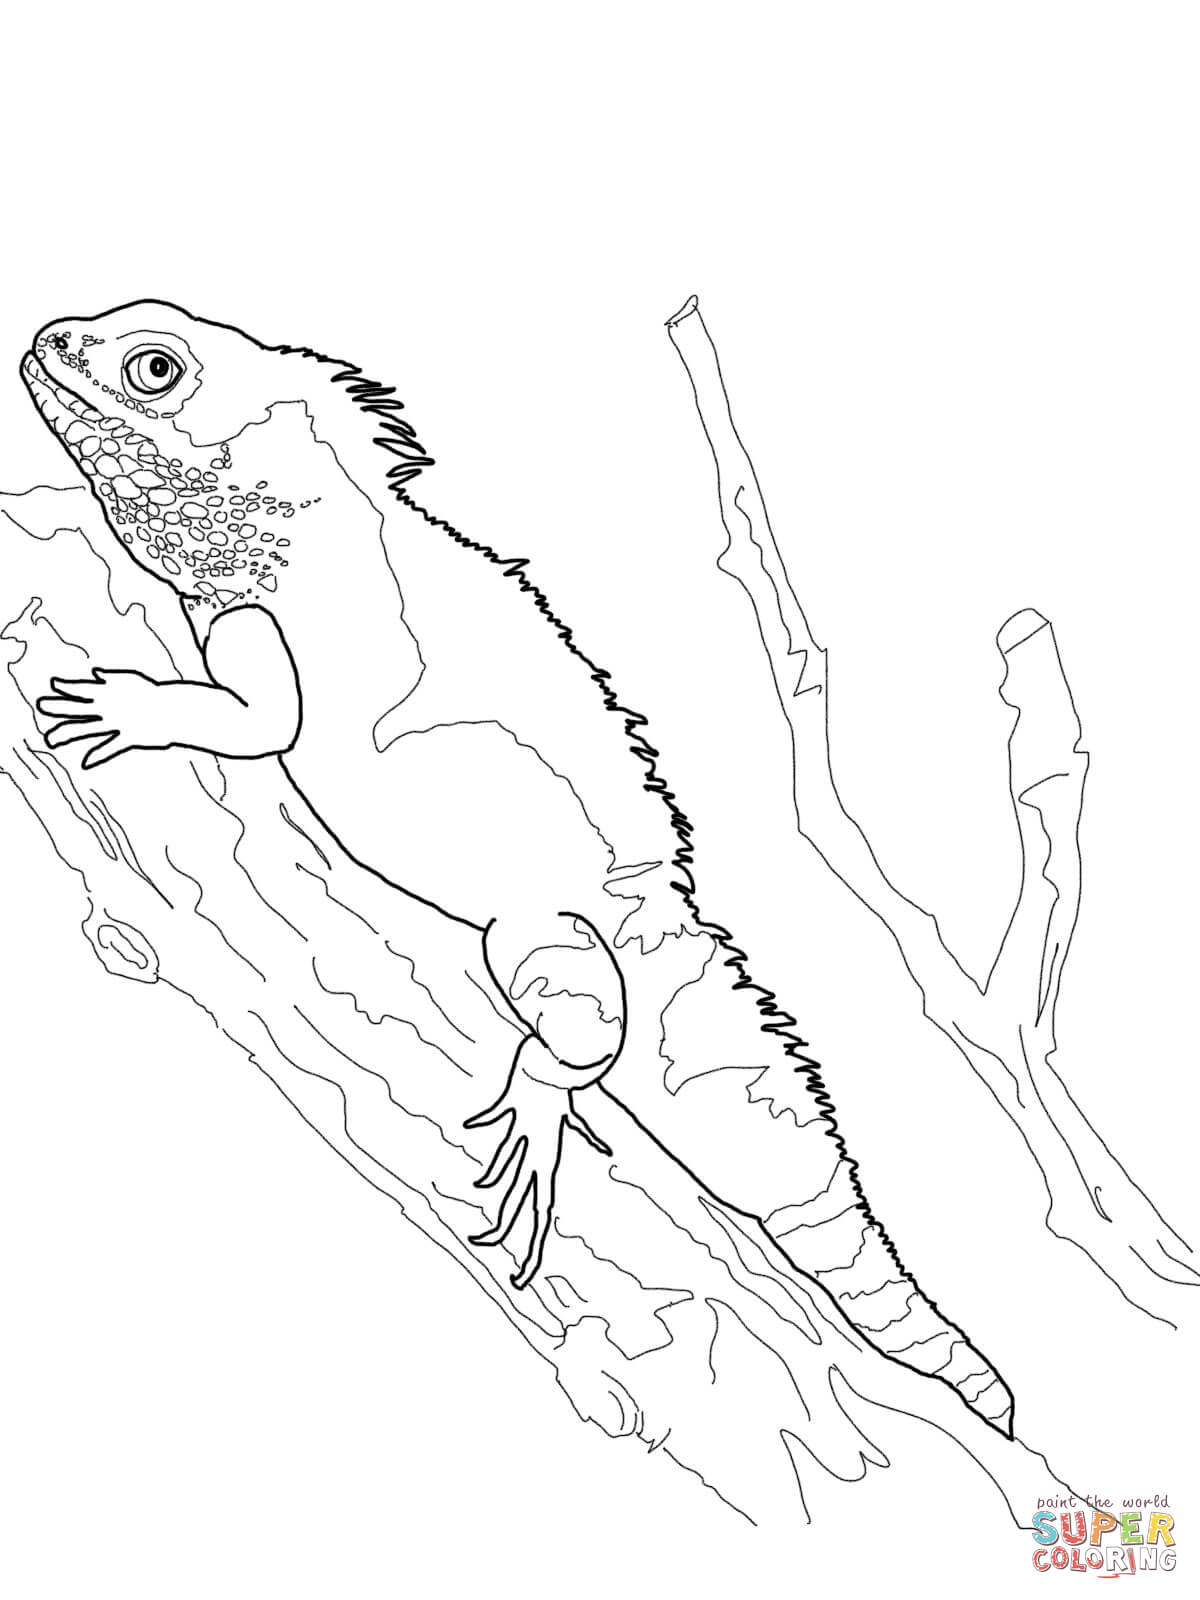 Bearded Dragon coloring #9, Download drawings